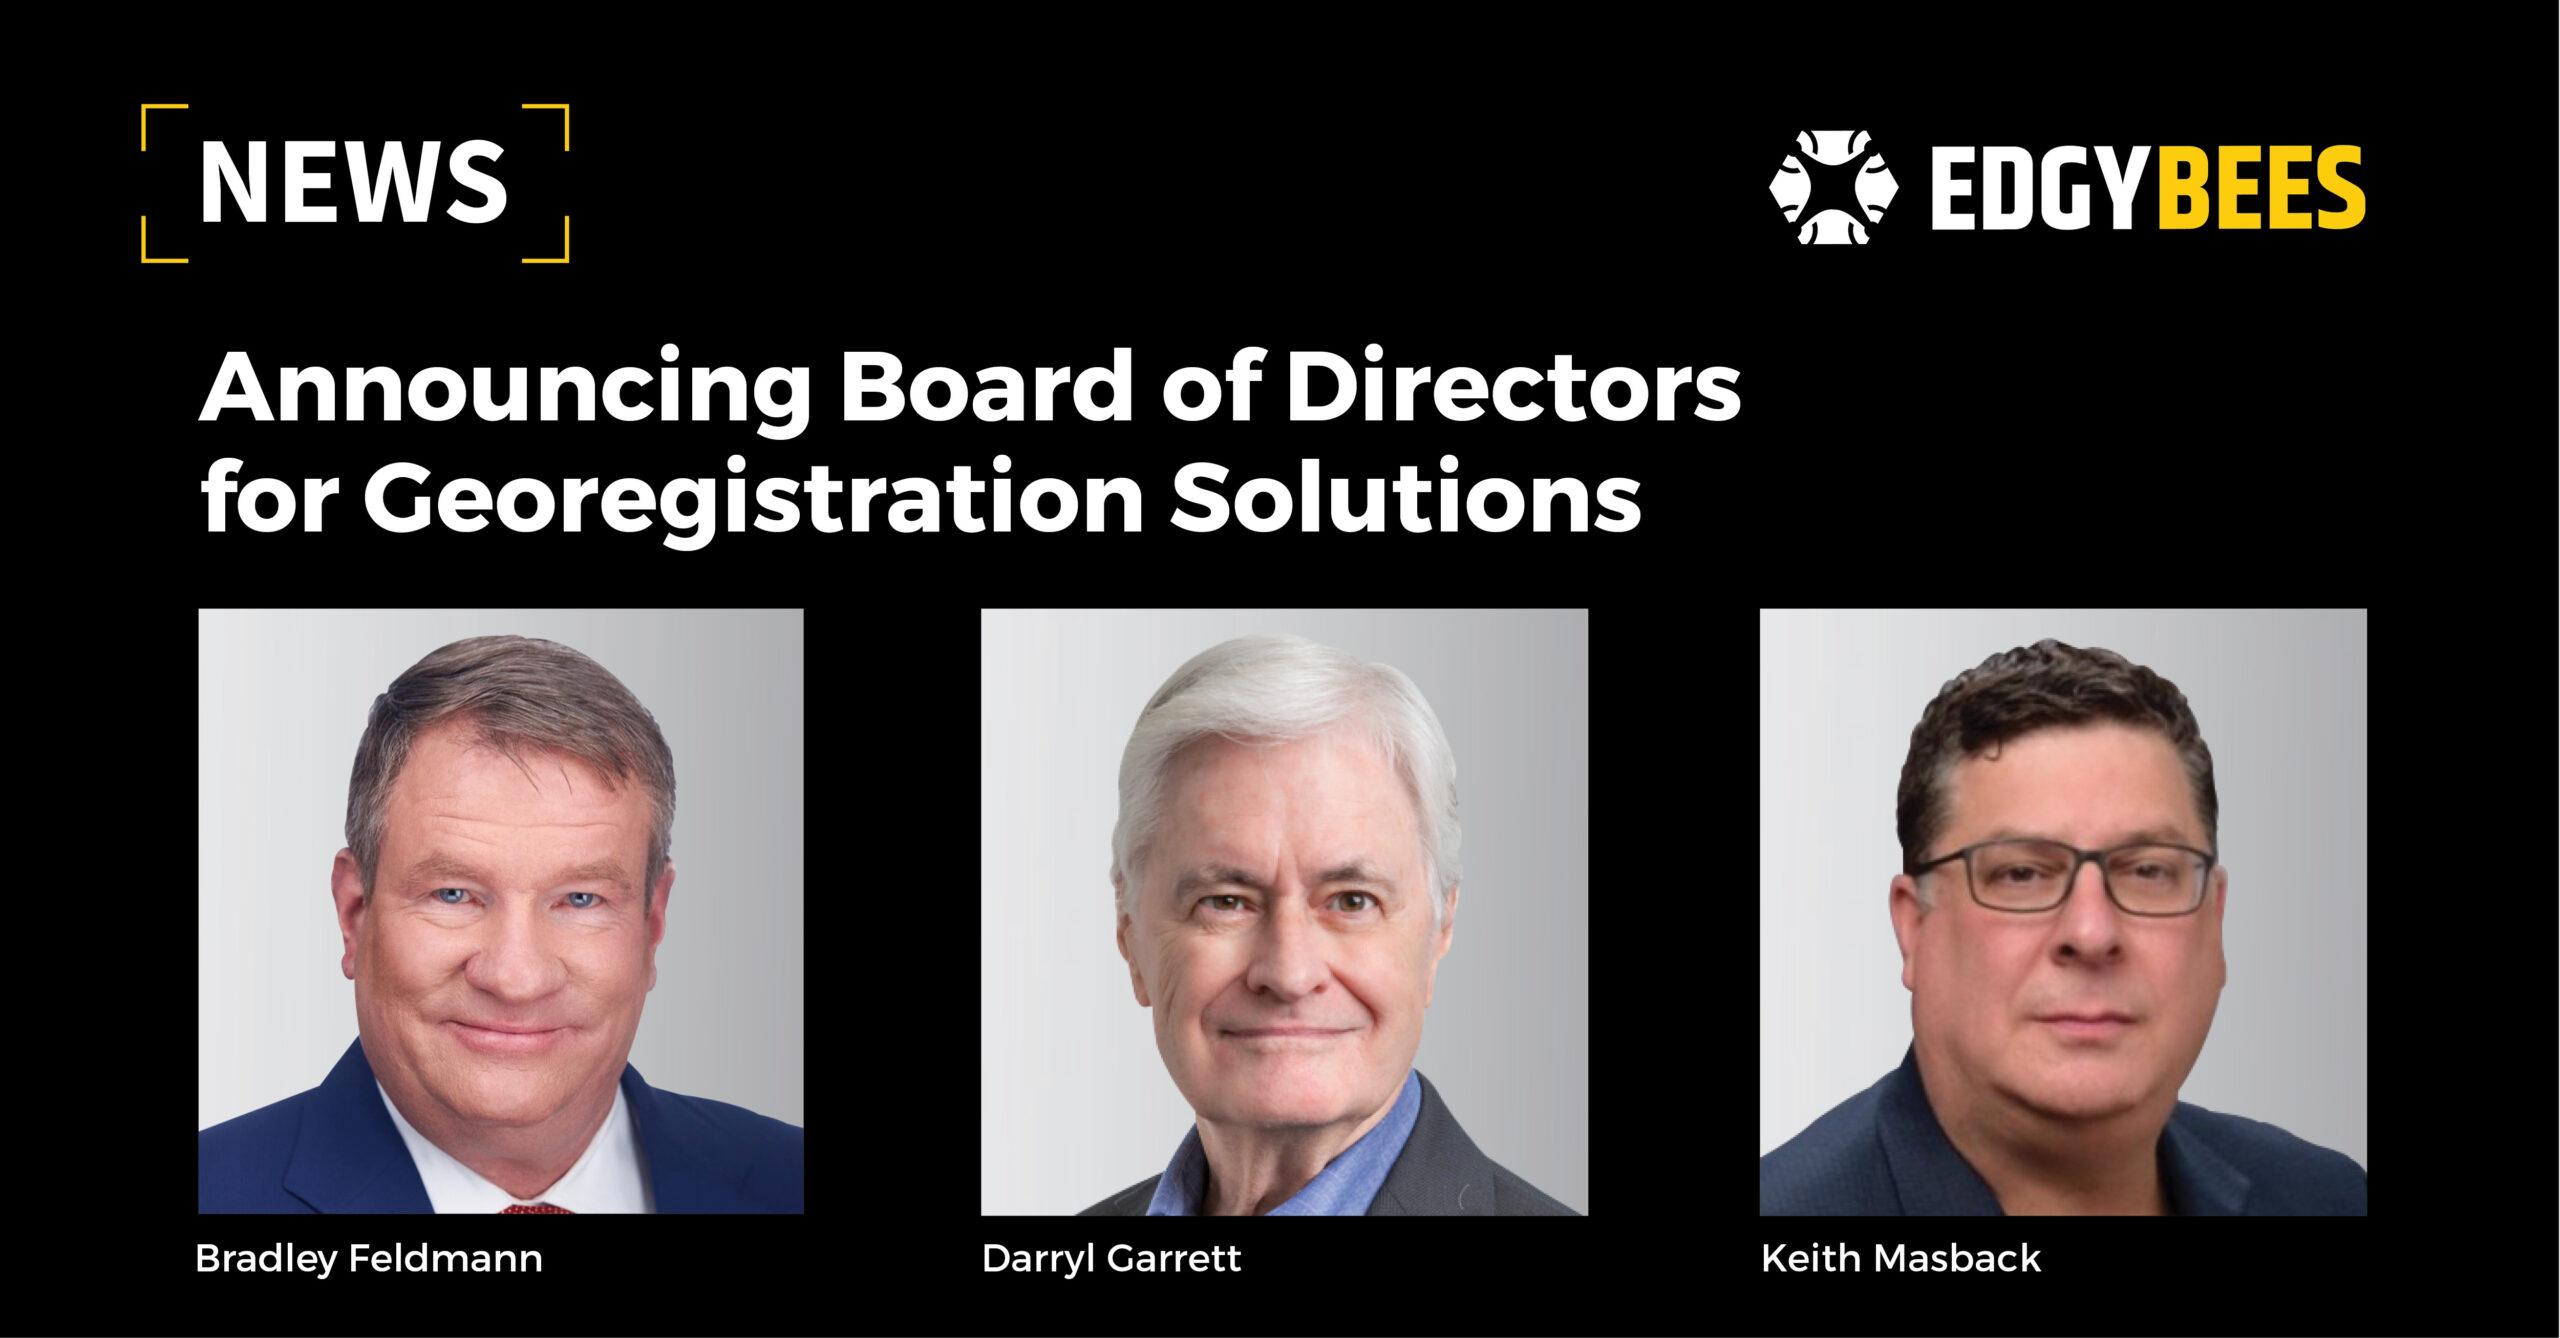 Product Edgybees Inc. Announces Board of Directors for Georegistration Solutions - Edgybees image